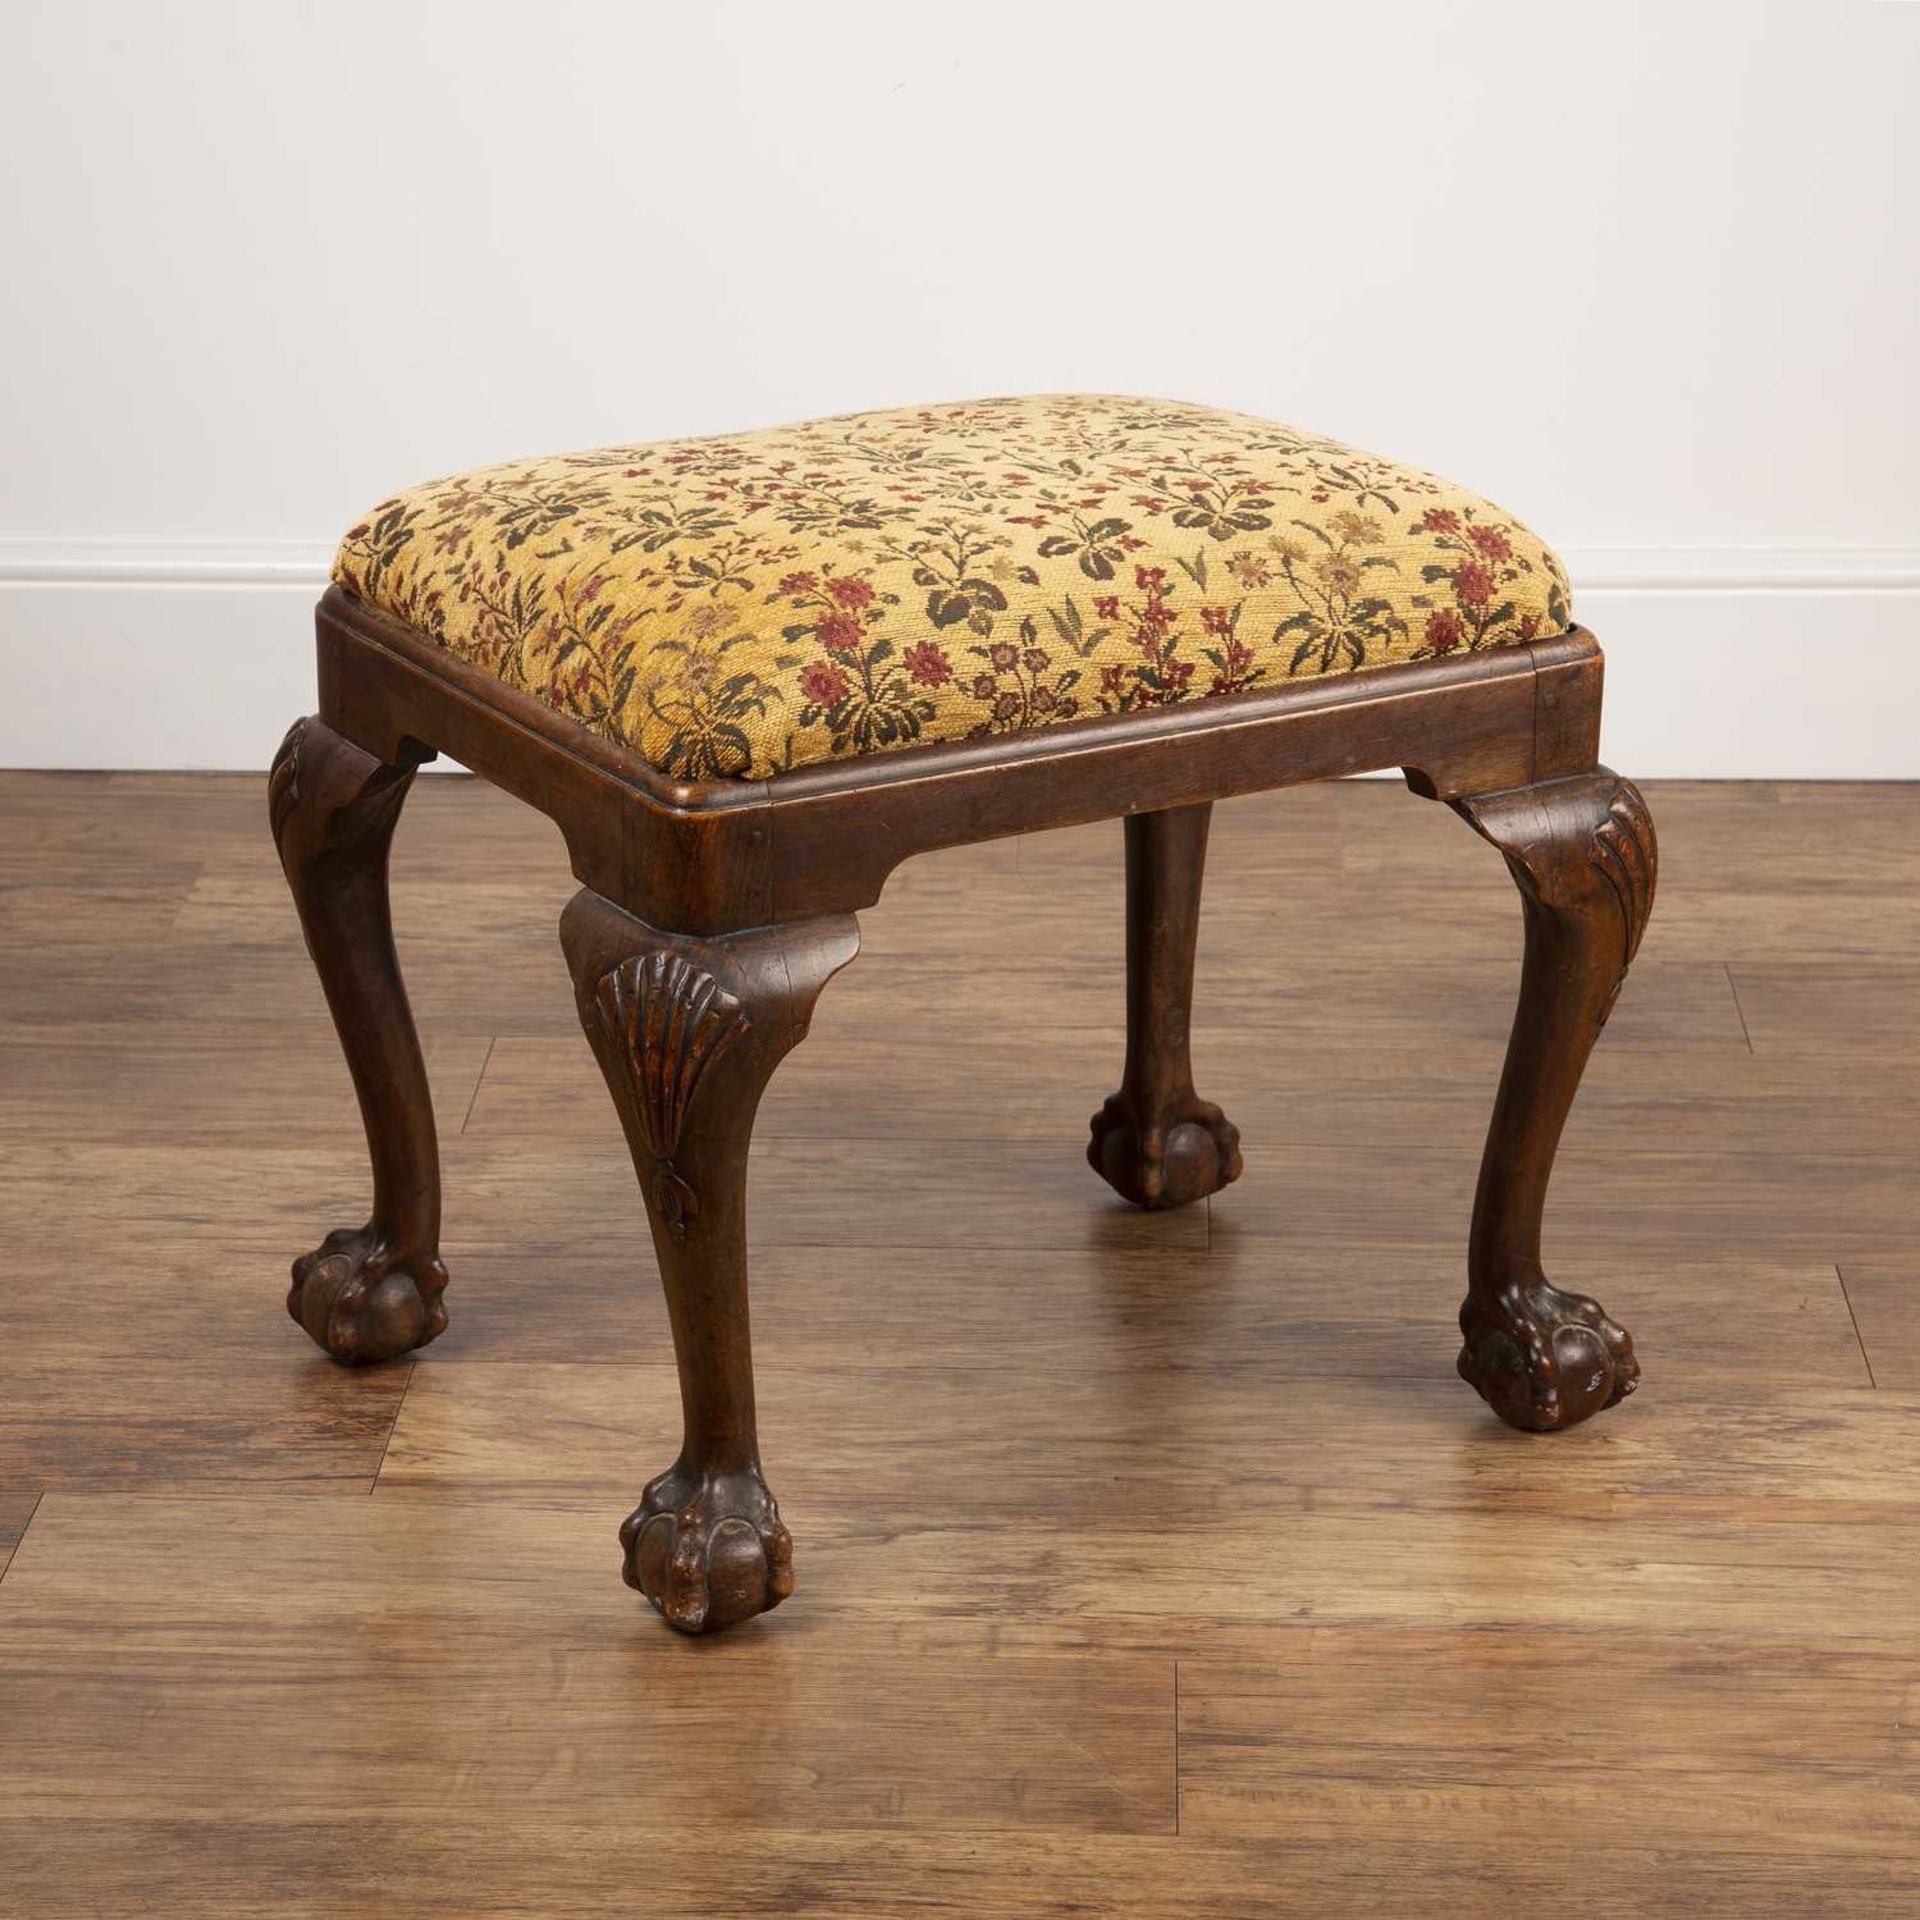 Mahogany stool 19th Century, in the Georgian style, on ball and claw feet, with yellow and floral